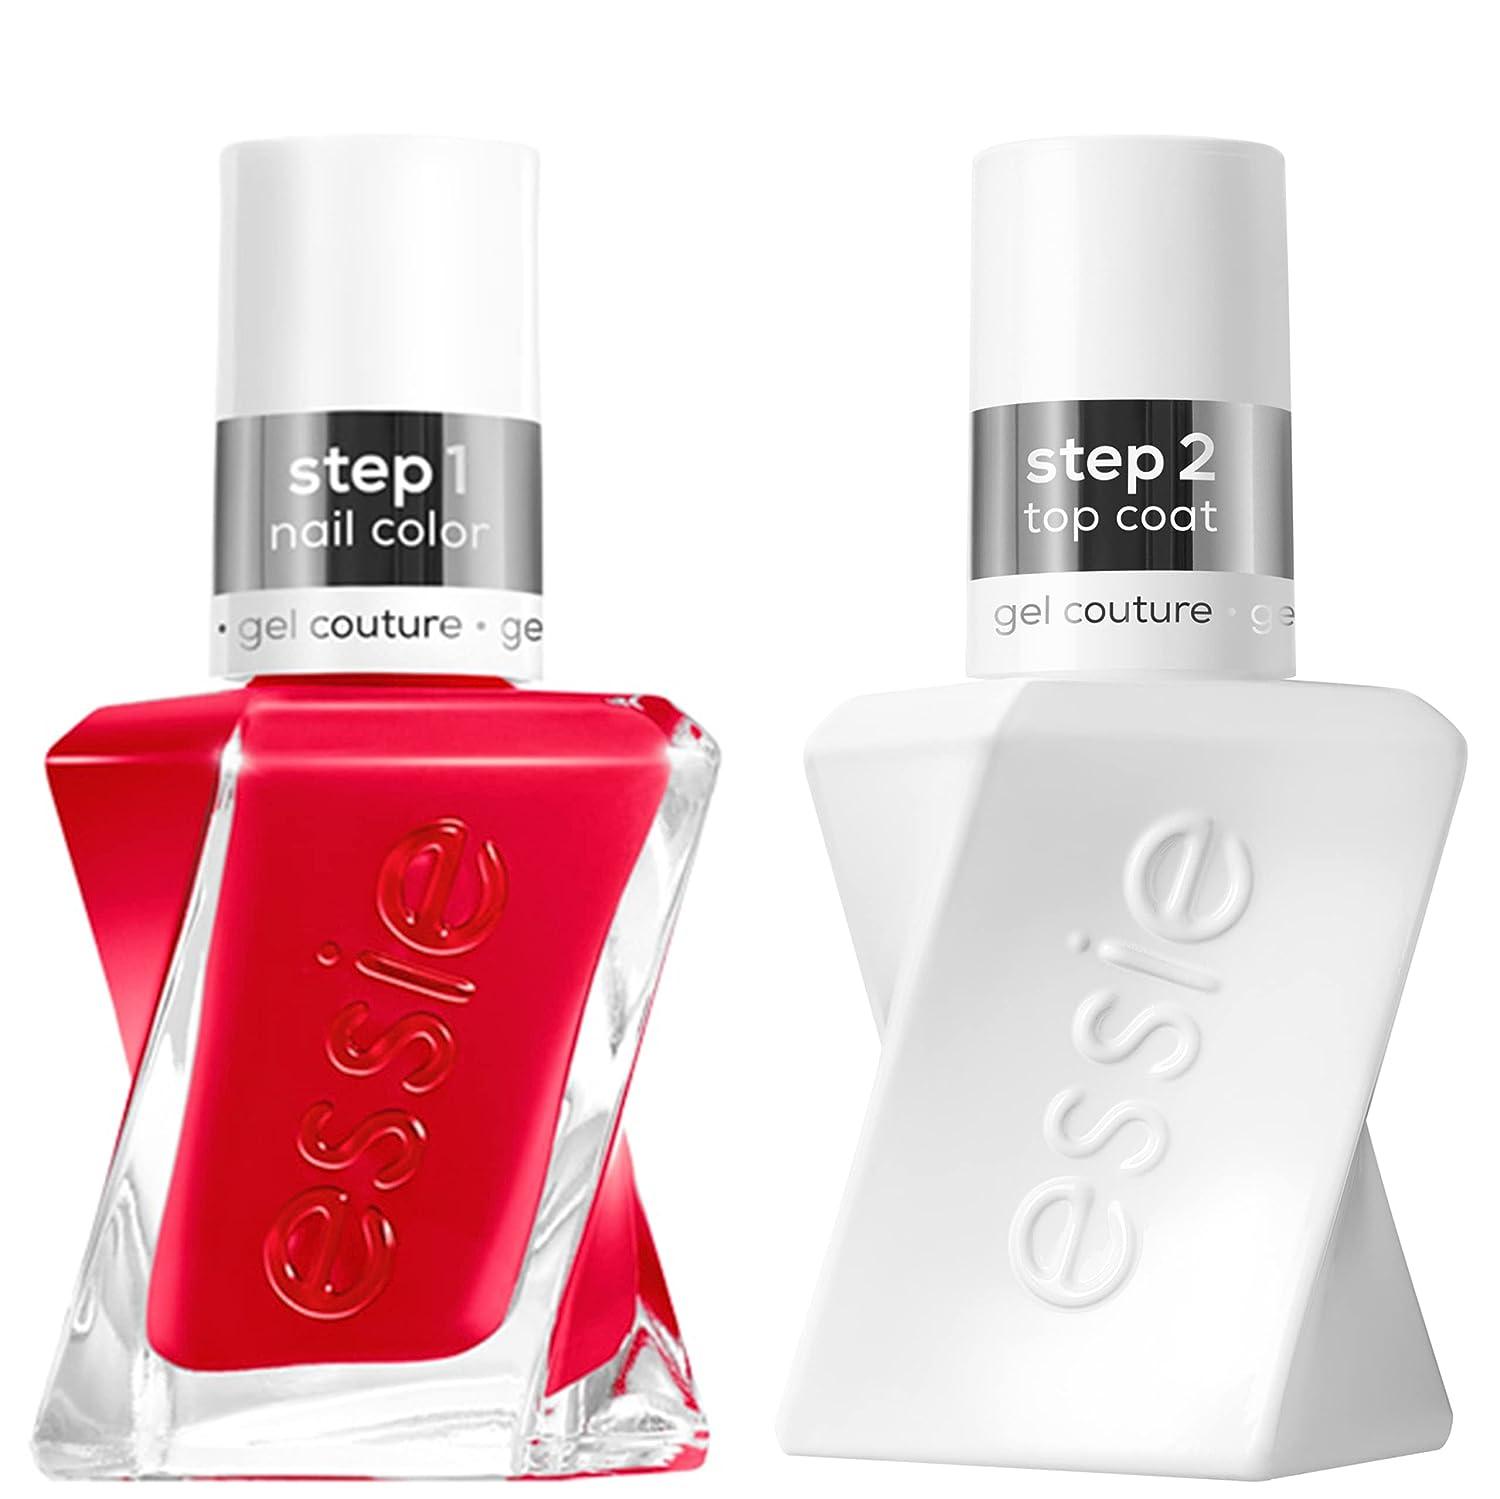 Essie Gel Couture Longwear Nail Polish + Top Coat Kit Scarlet Red Nail  Polish Rock The Runway + Top Coat Gifts For Women And Men 0.46Oz Each